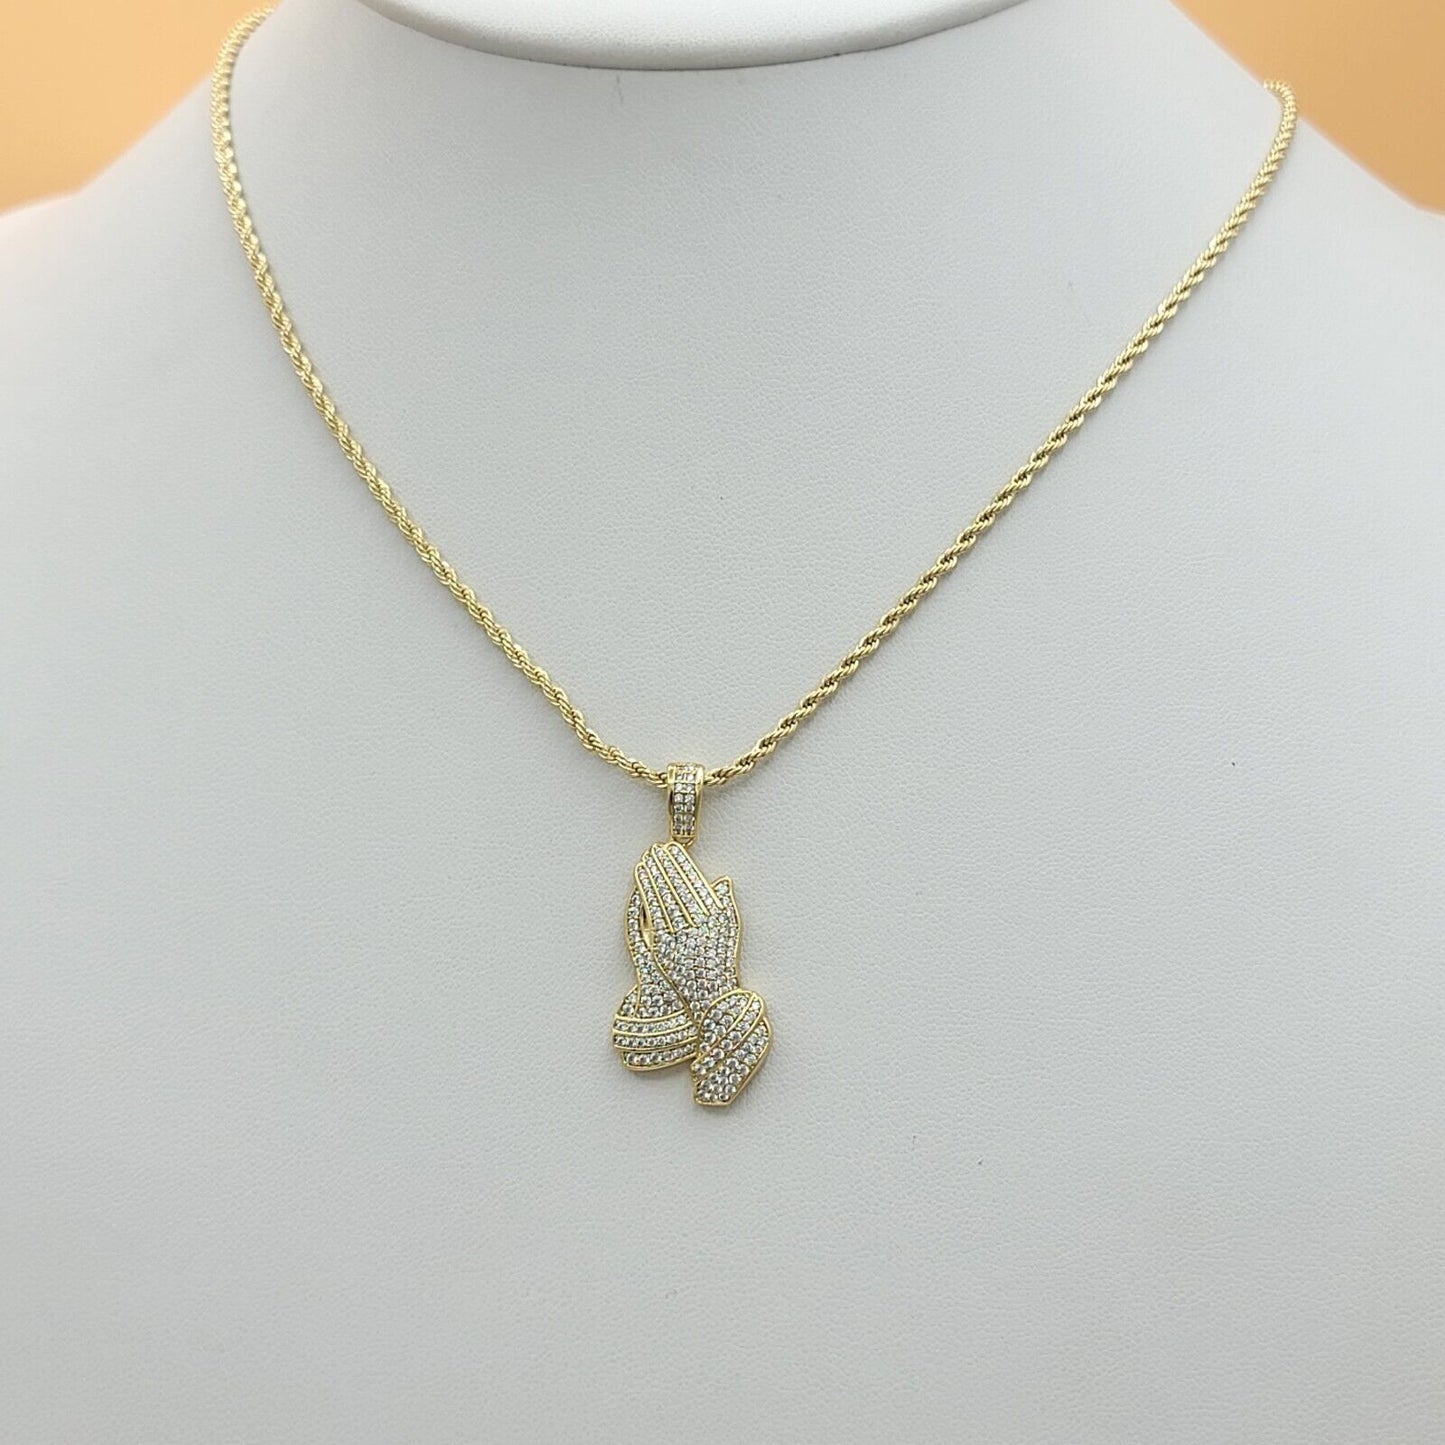 Necklaces - 14k Gold Plated. Praying Hands LET'S PRAY Pendant & Chain.